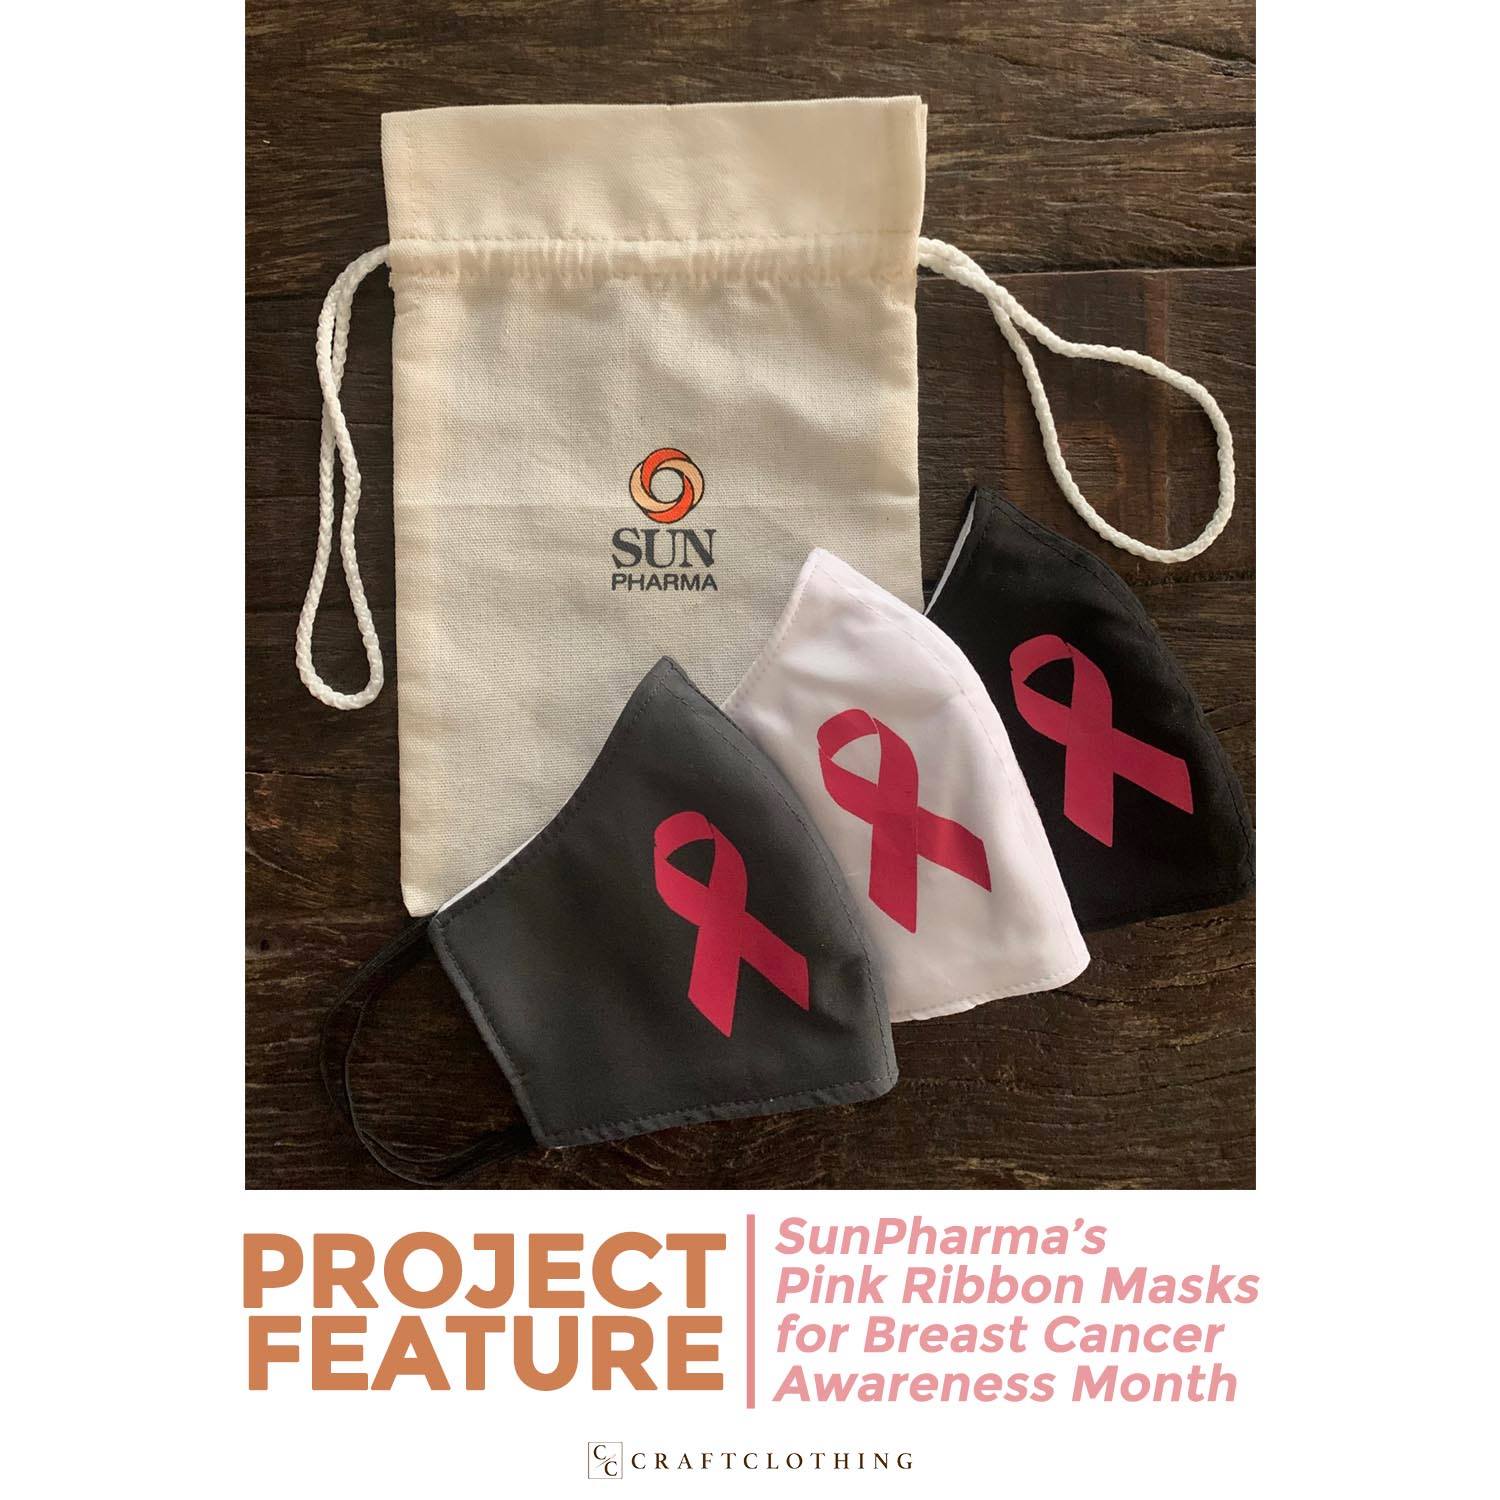 PROJECT FEATURE: Sun Pharma’s Custom-made masks for Breast Cancer Awareness Month